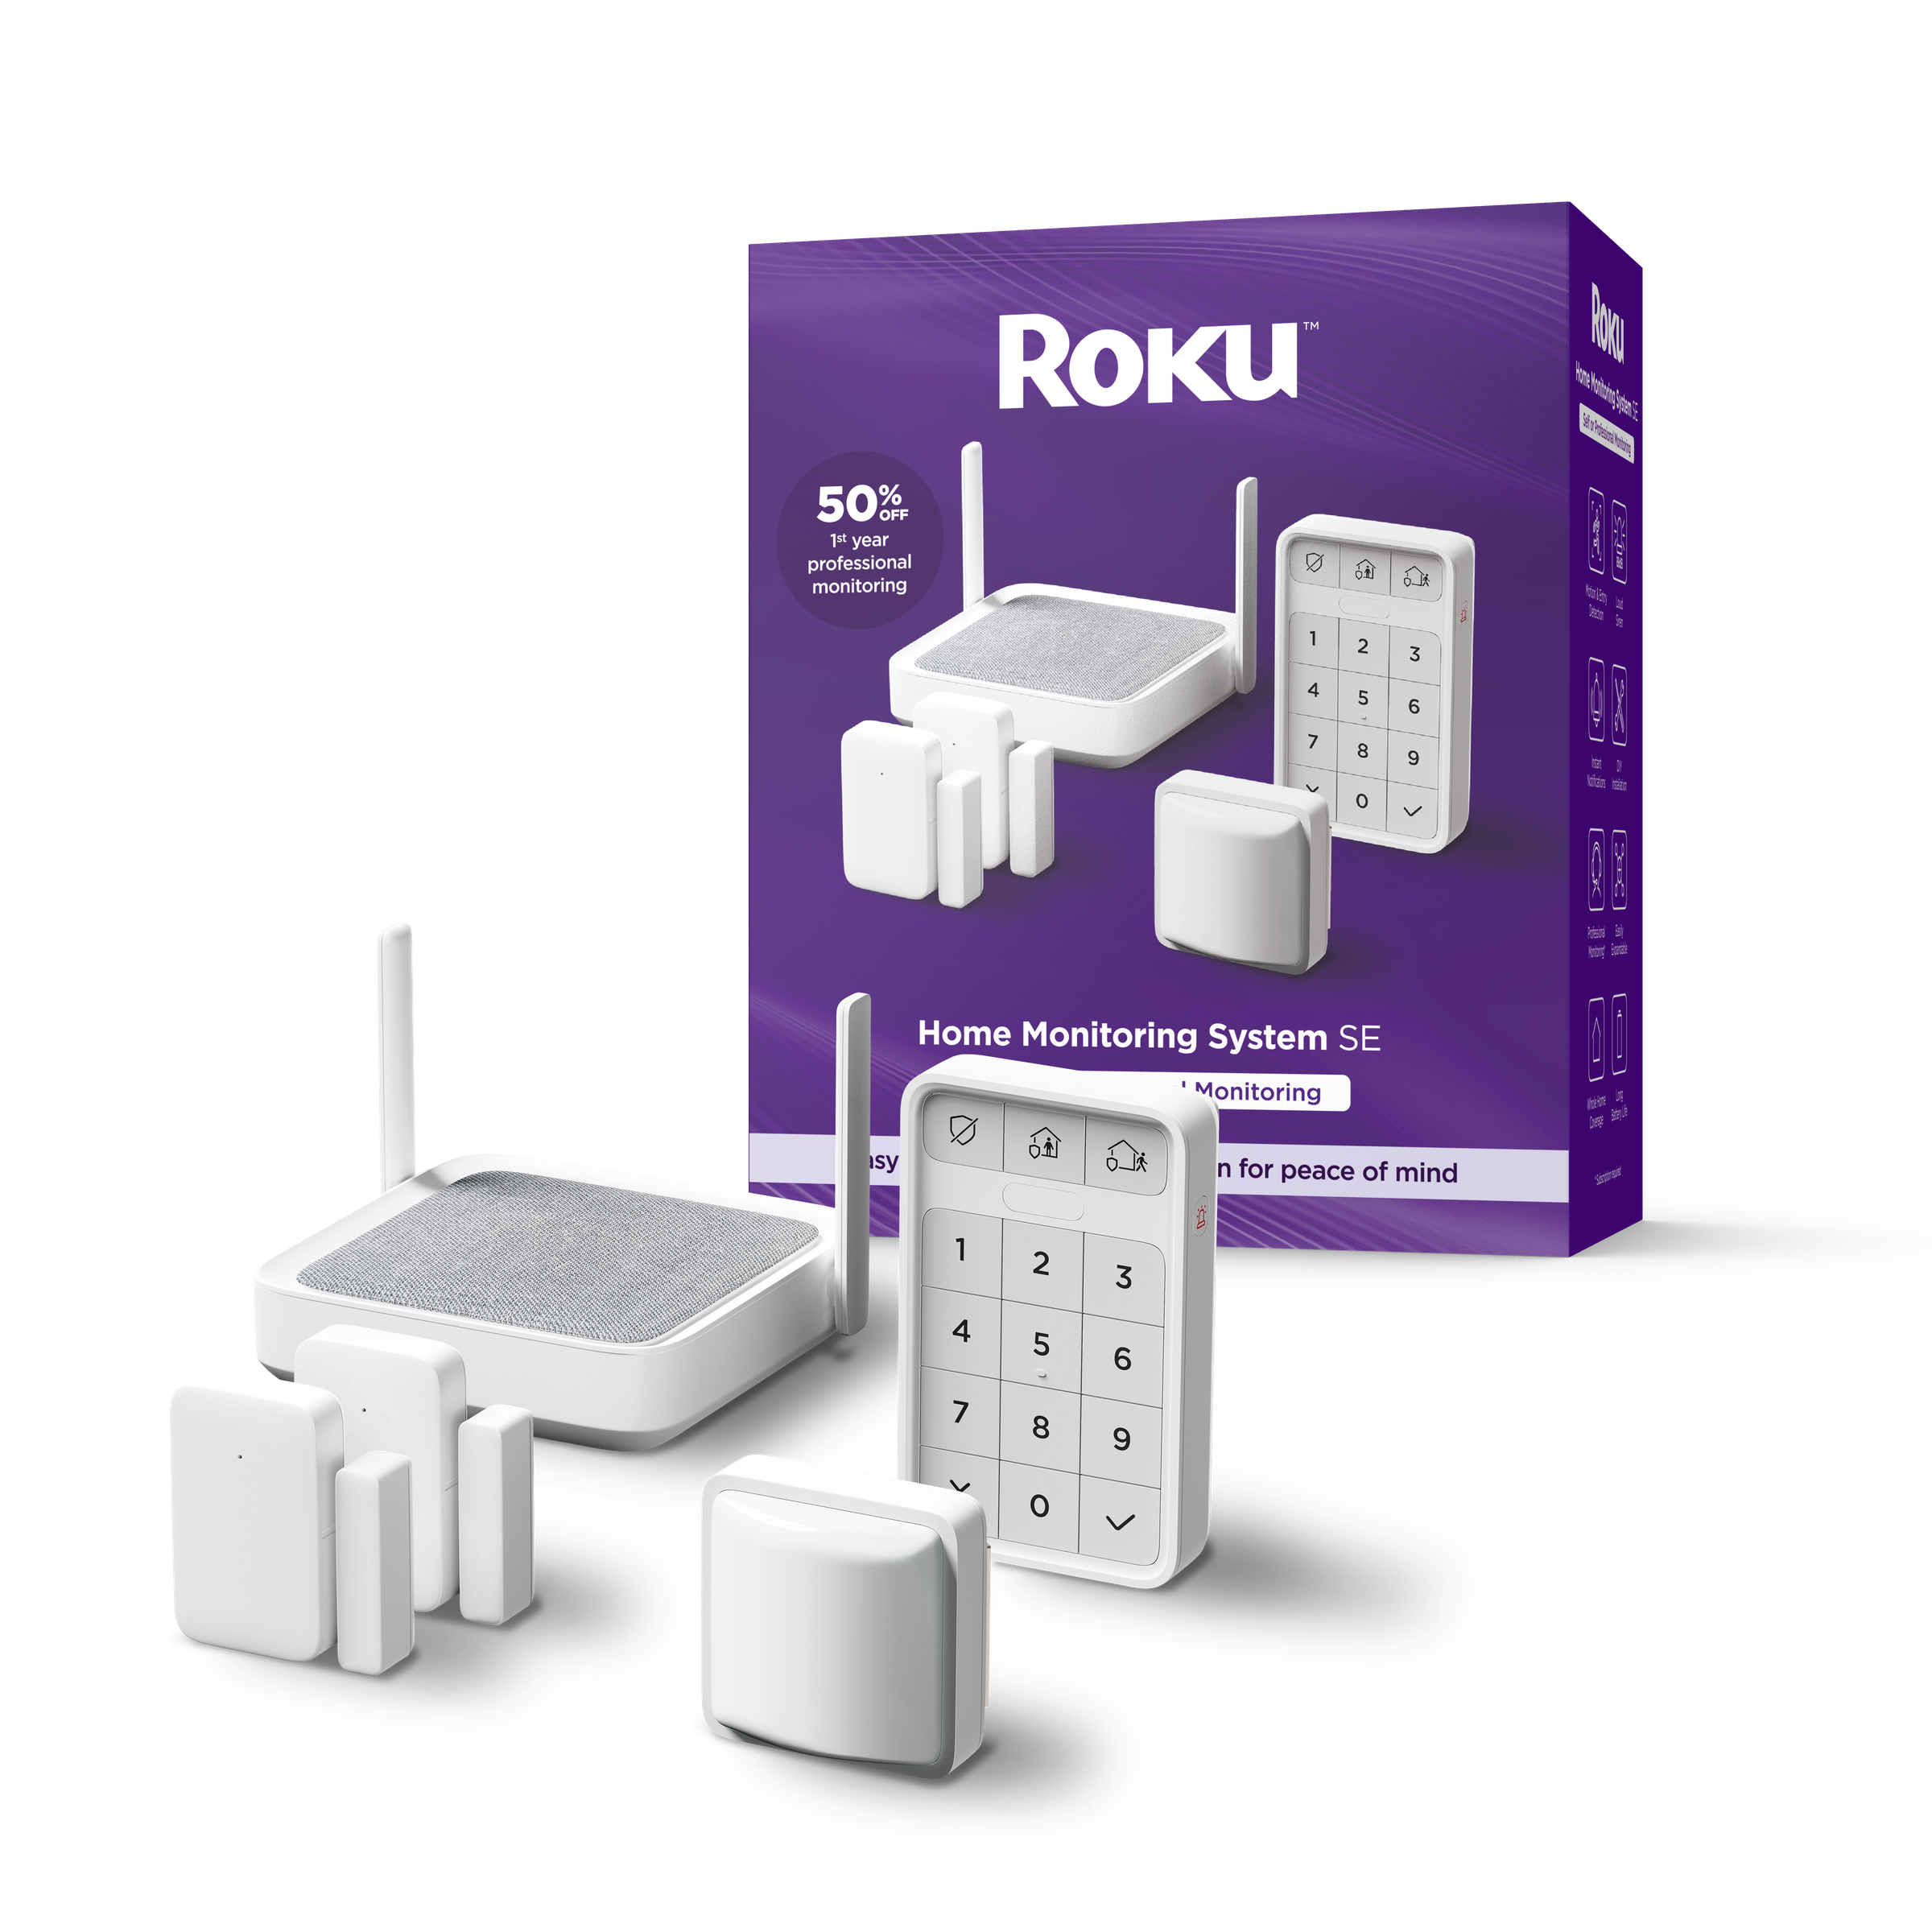 <em>Roku’s new home monitoring system is a rebranded version of Wyze’s own system (pictured). The two are not compatible.</em>